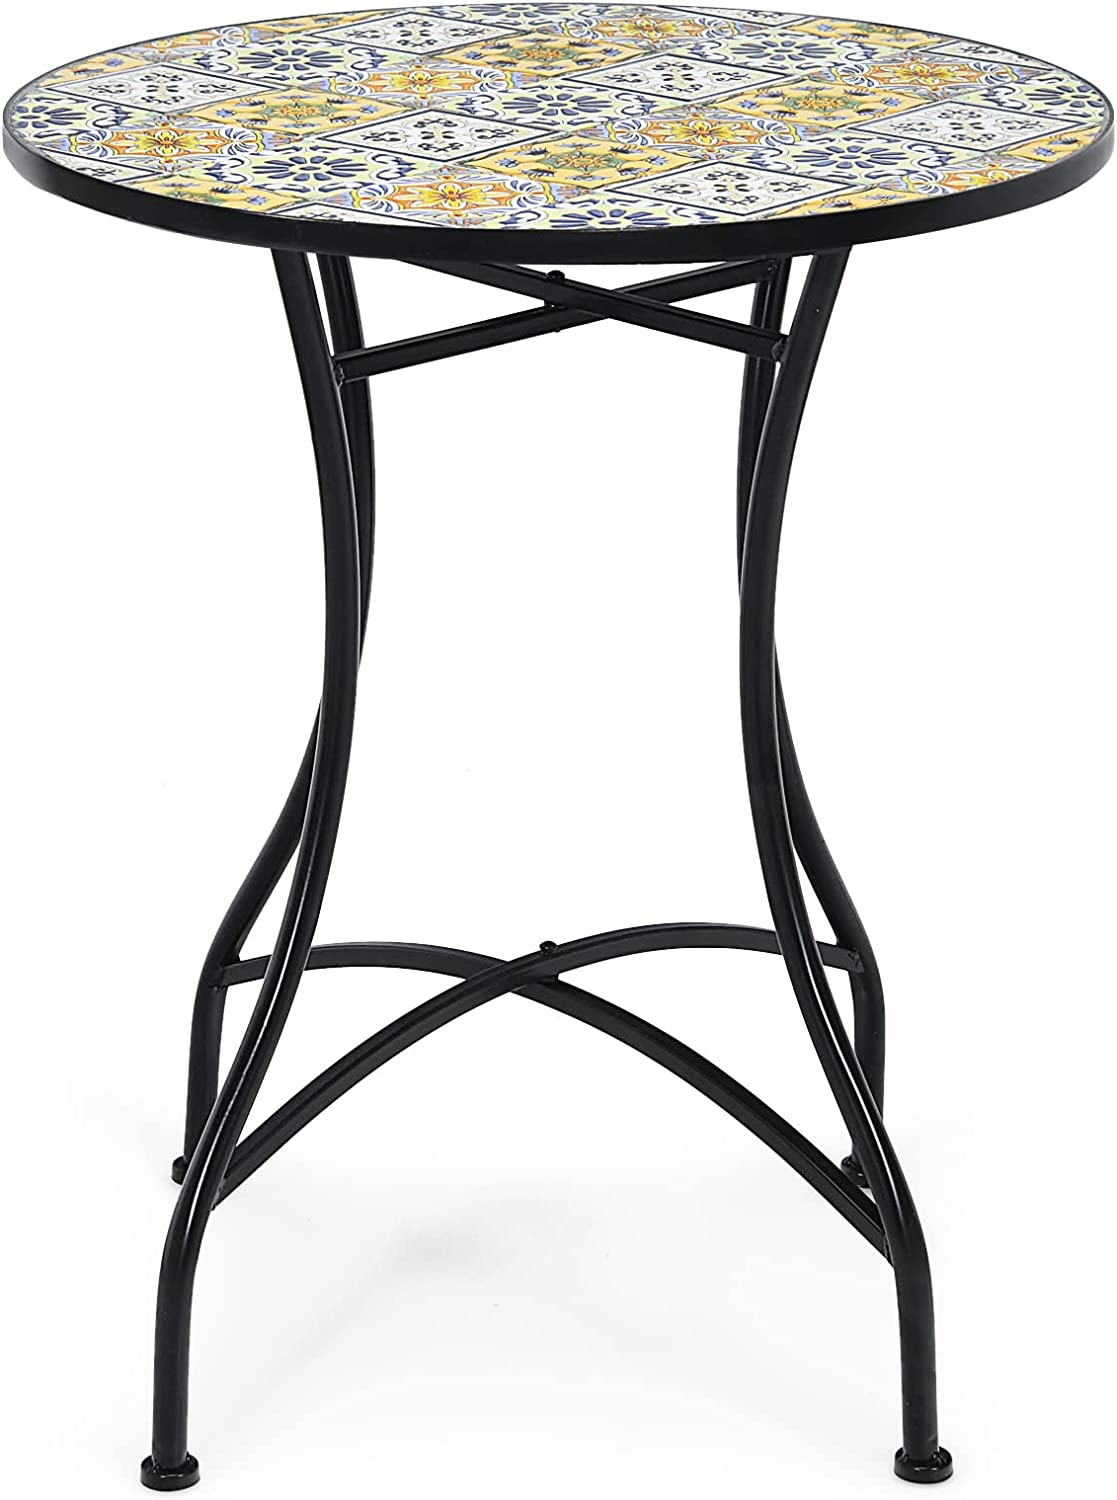 Giantex Mosaic Round Table, Outdoor Dining Table with Exquisite Floral Pattern and Ceramic Tile Tabletop